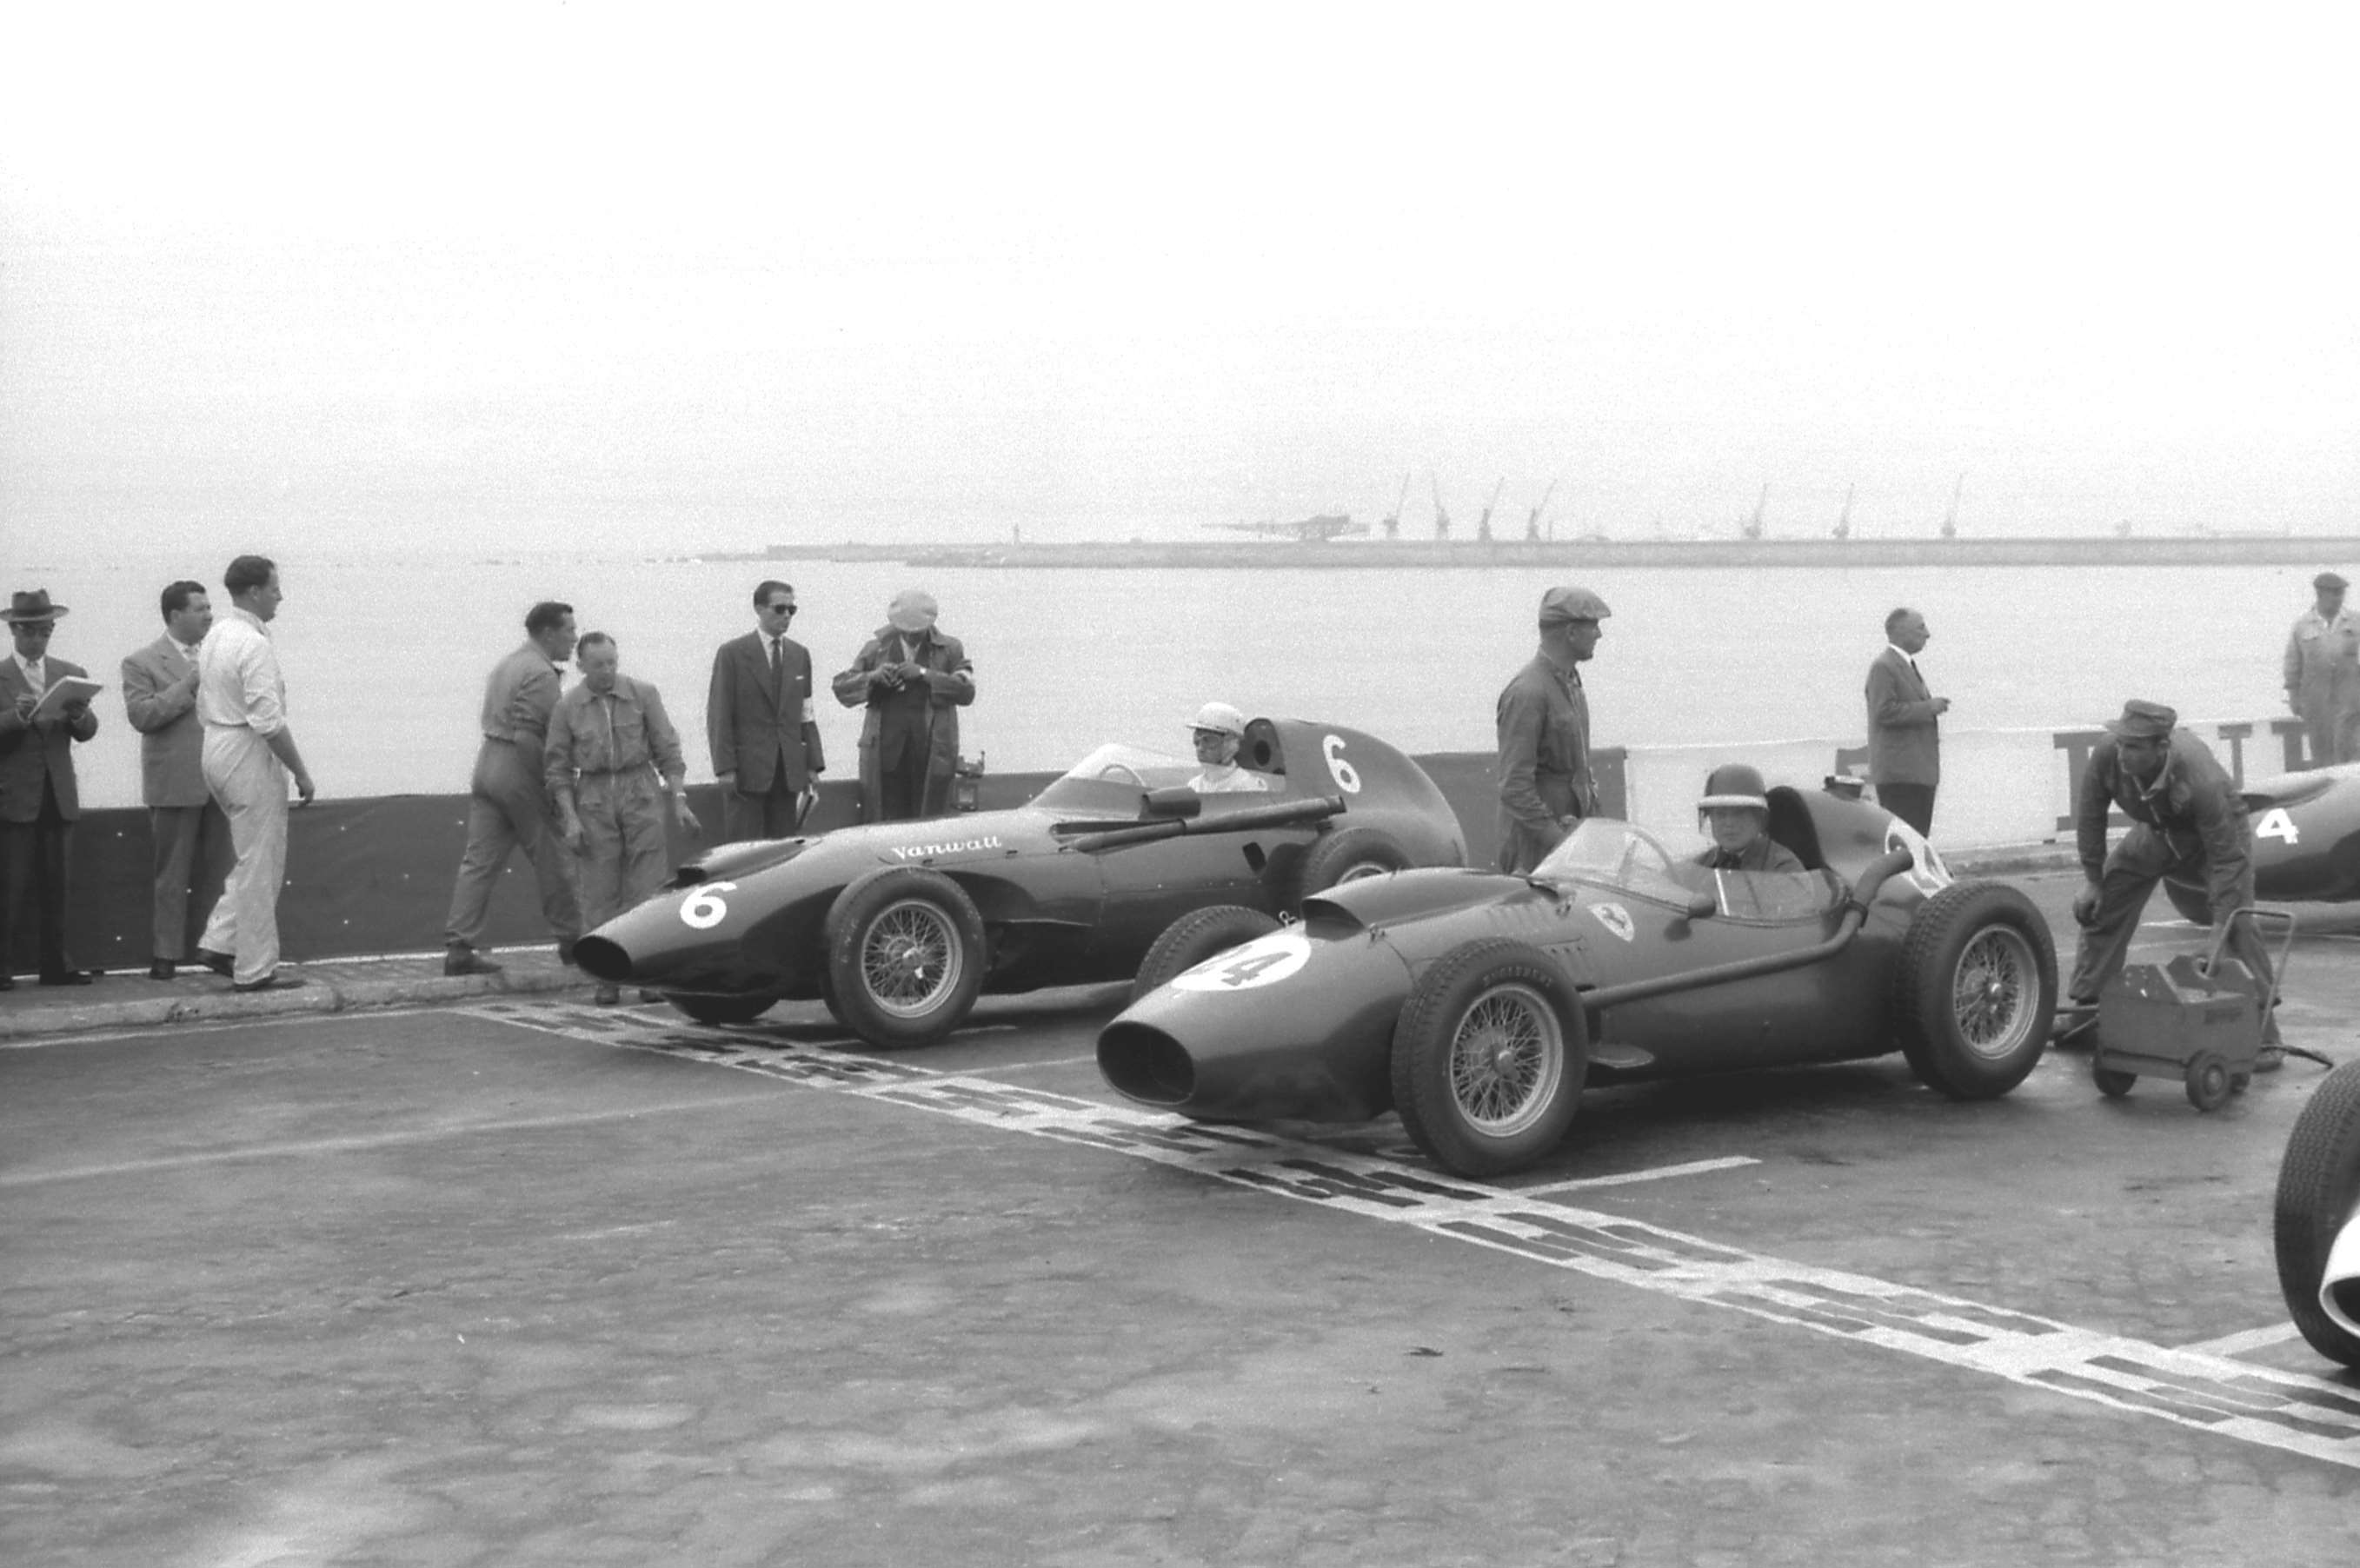 4 - Front row of the starting grid at Oporto - Hawthorn in his Ferrari on the middle slot, Stuart Lewis-Evans of Vanwall on the far side.